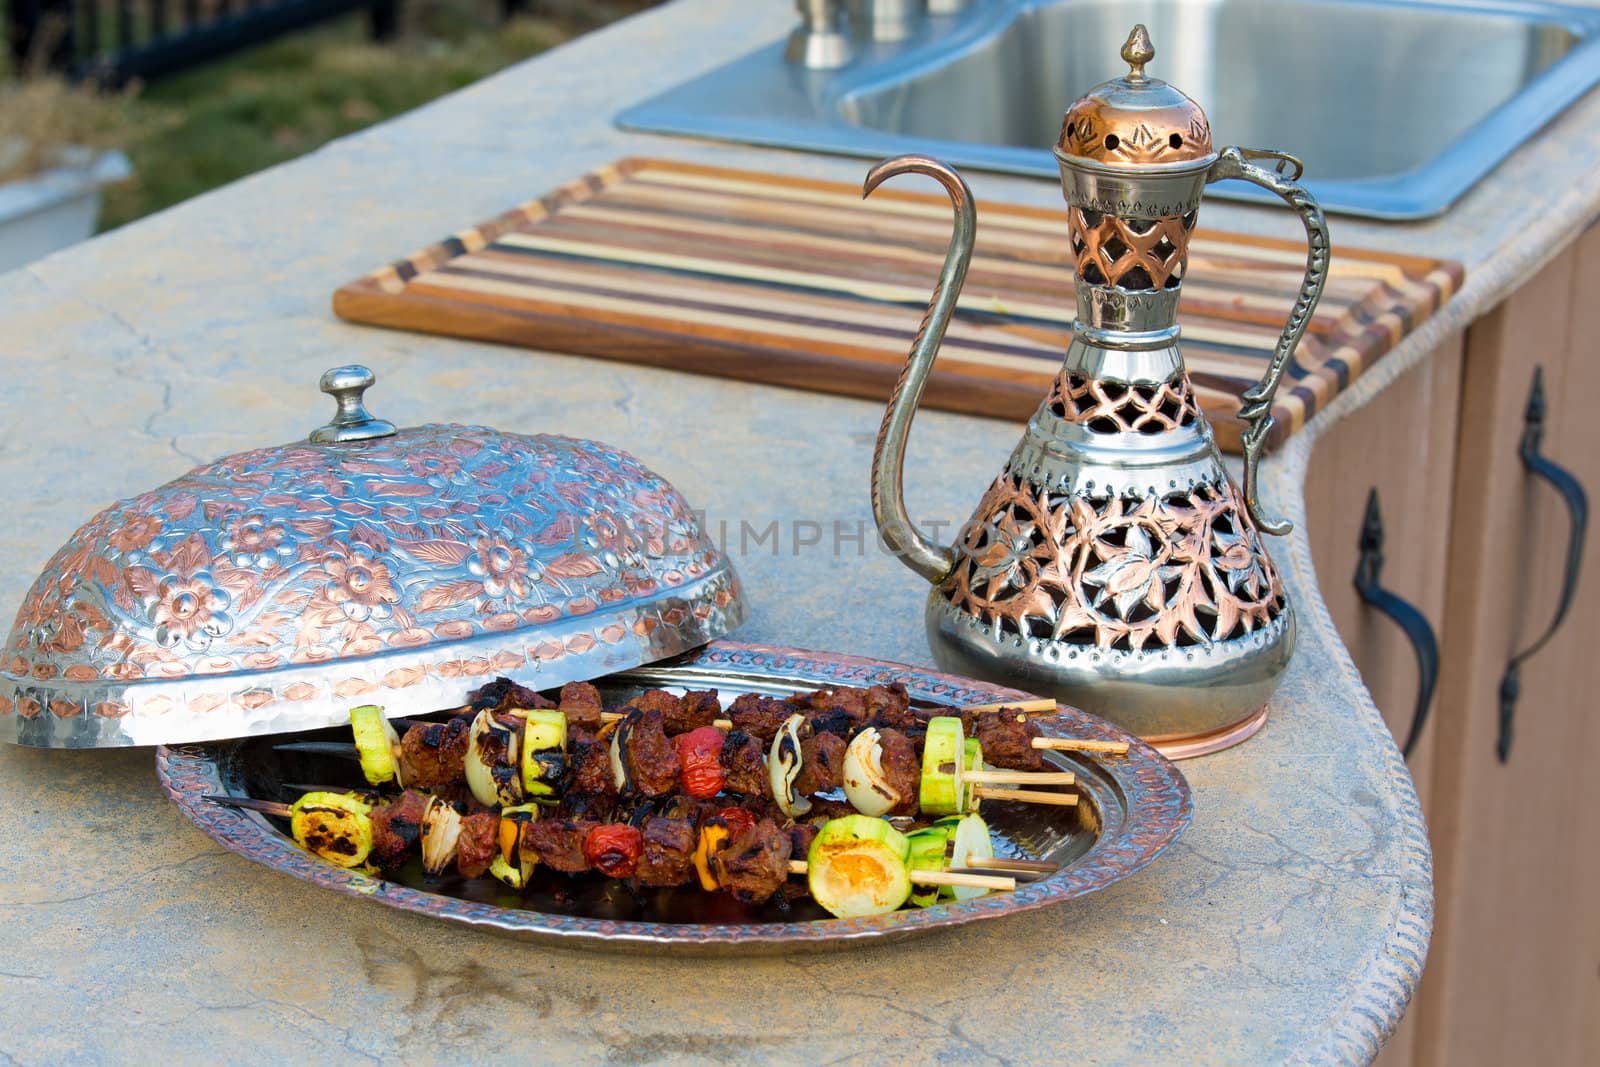 Sish skewers with vegetables presented in a copper bowl on a concrete counter top kitchen along with a matching copper pitcher.